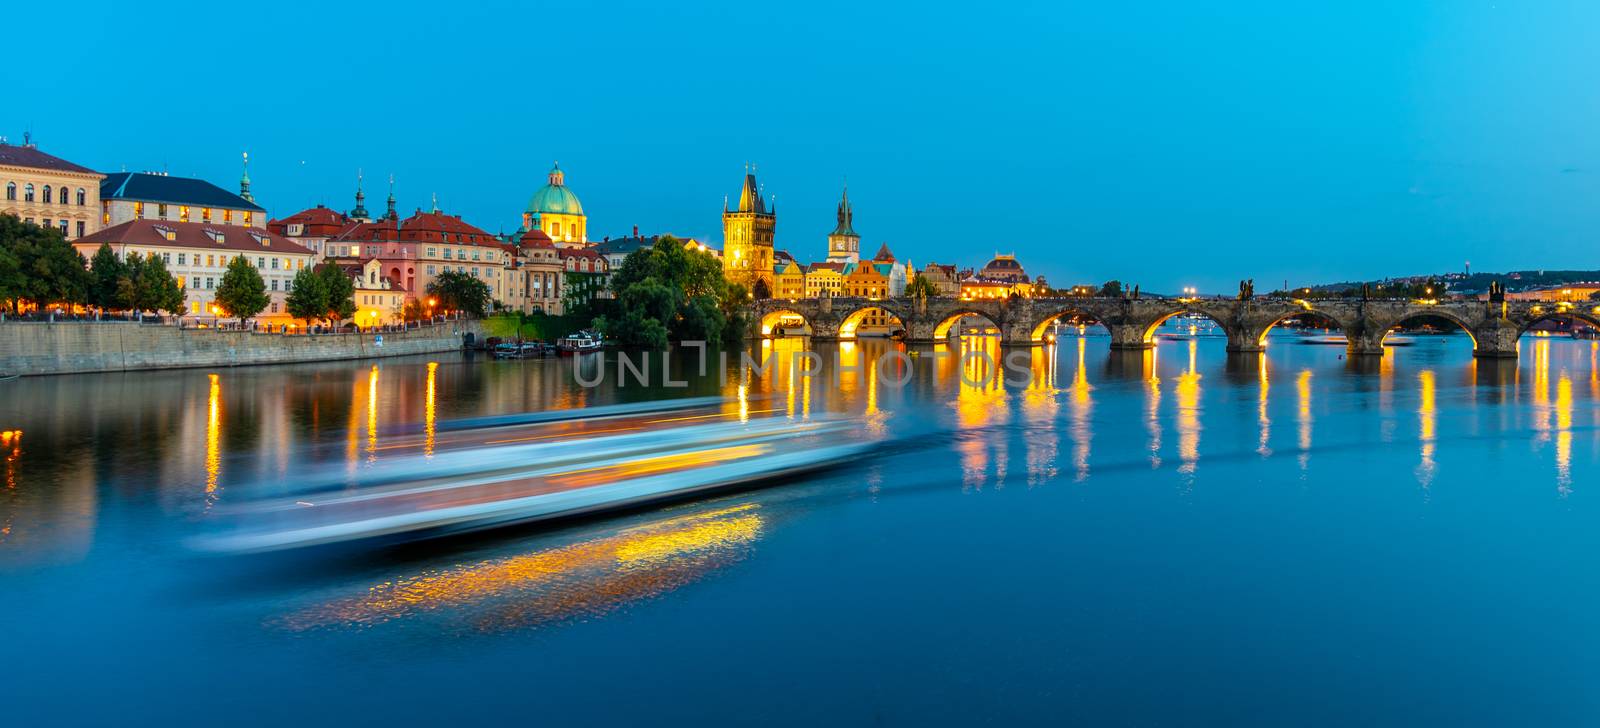 Illuminated Charles Bridge reflected and blurred tourist boat in Vltava River. Evening in Prague, Czech Republic by pyty